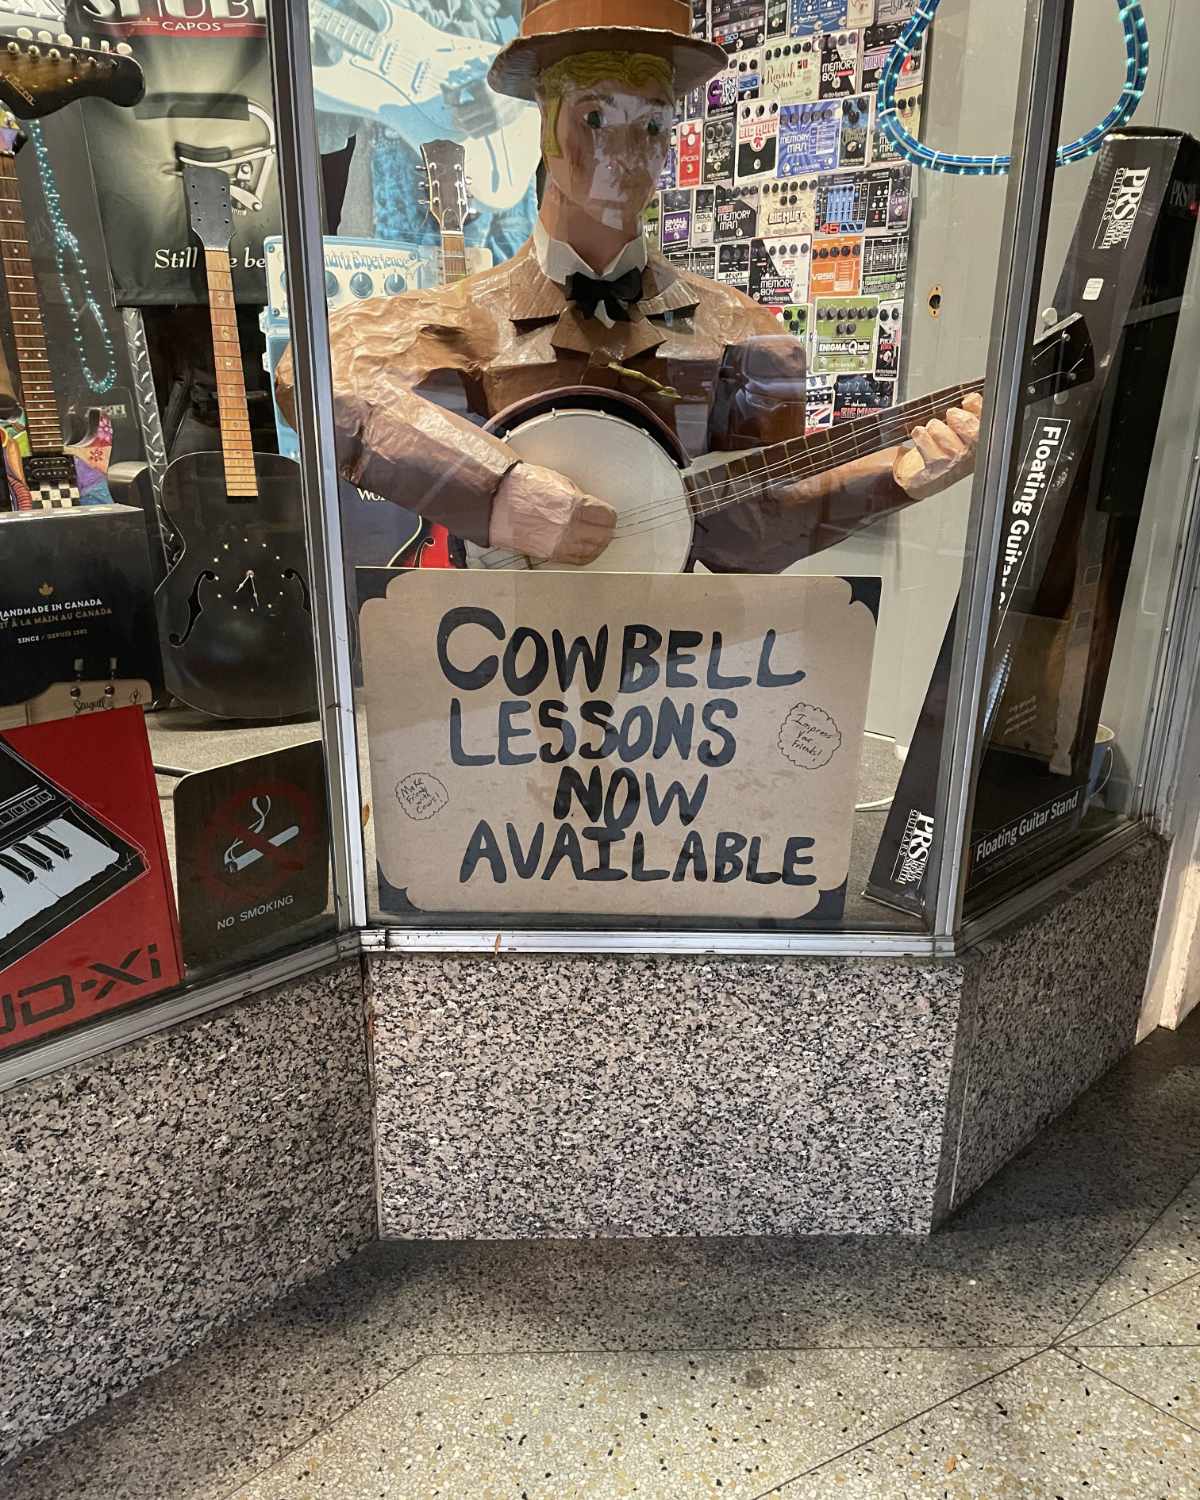 Found at a local music store